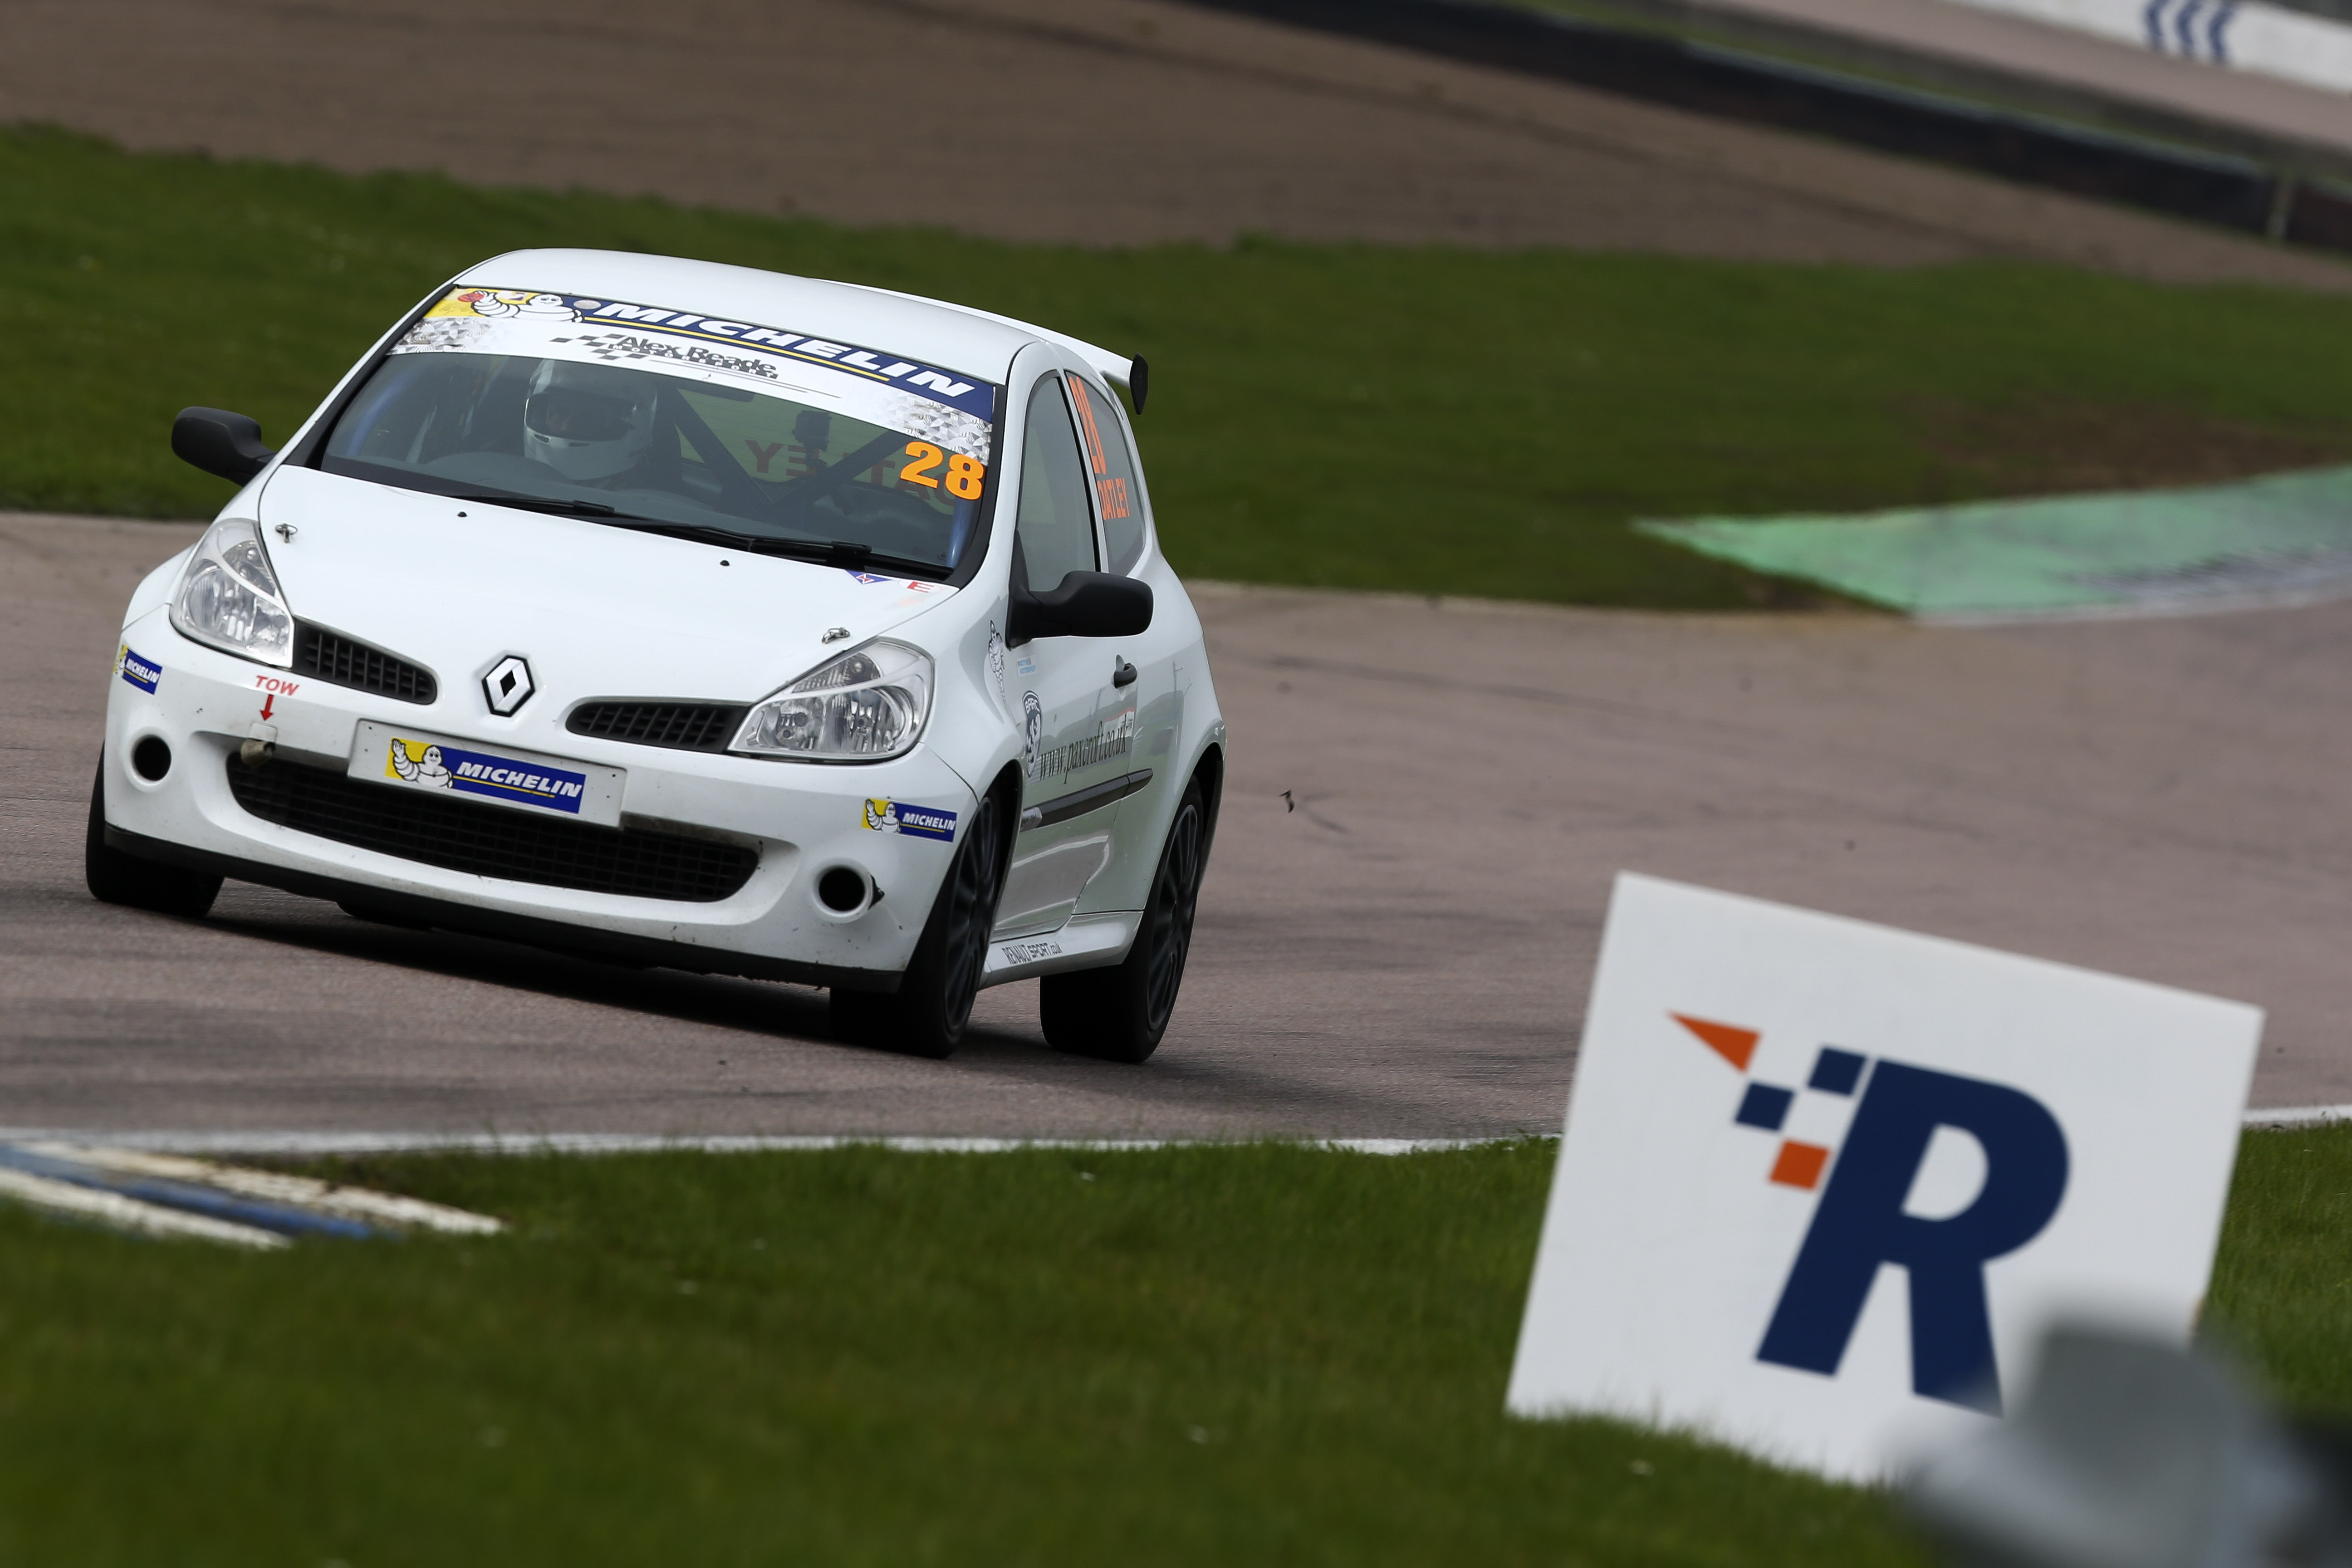 BATTLE IN MICHELIN CLIO CUP SERIES CHAMPIONSHIP SET BECOME EVER CLOSER - Click here to view this news entry